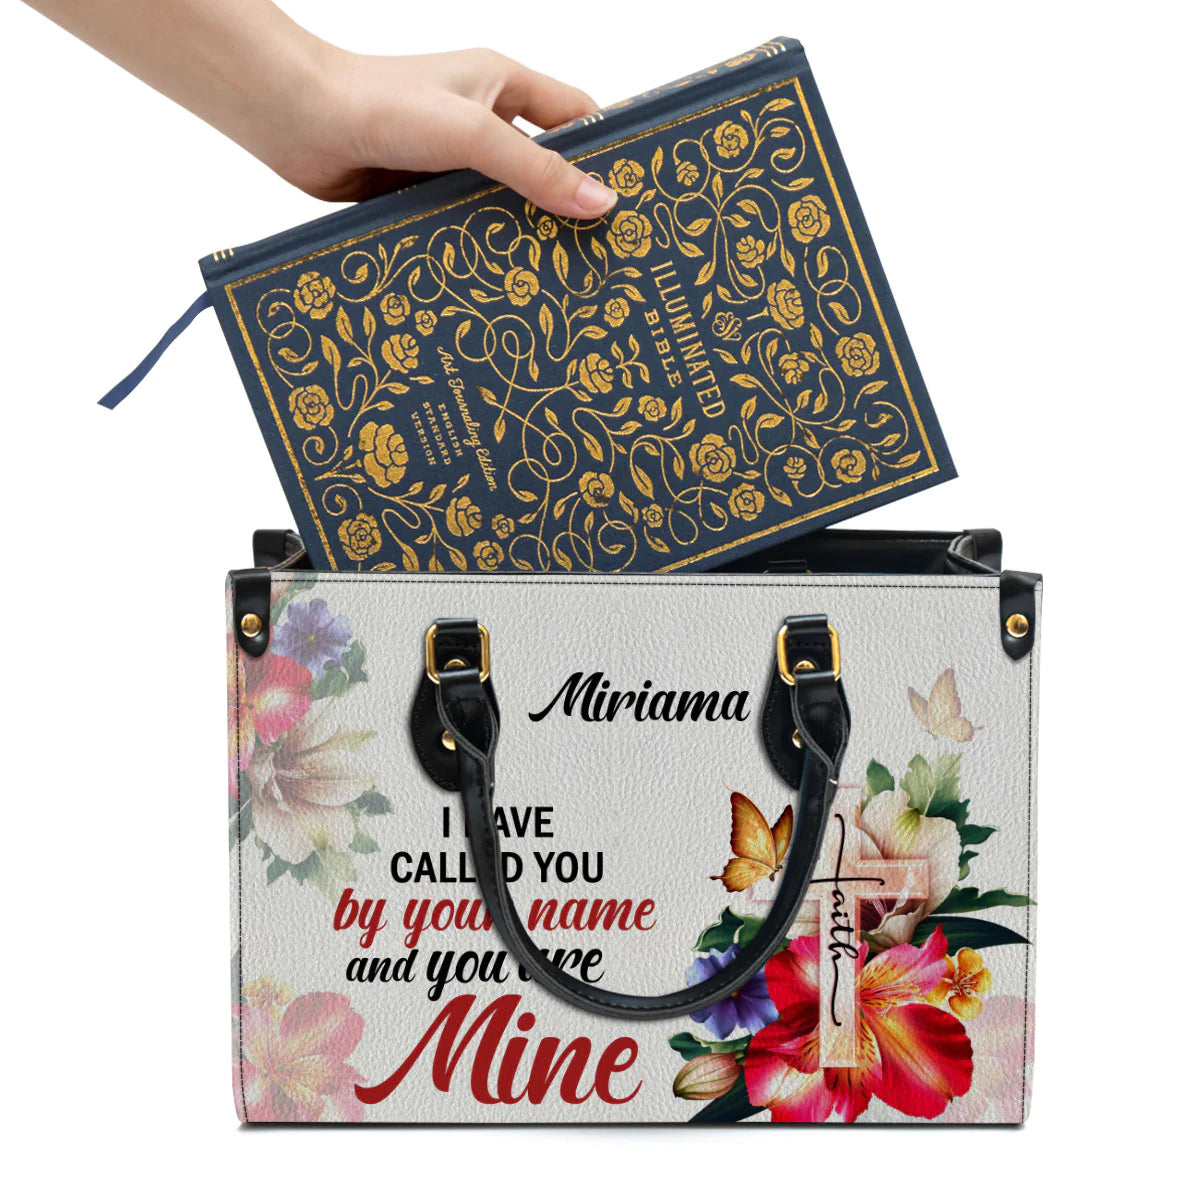 Christianart Handbag, I Have Called You By Your Name Isaiah 43:1, Personalized Gifts, Gifts for Women. - Christian Art Bag